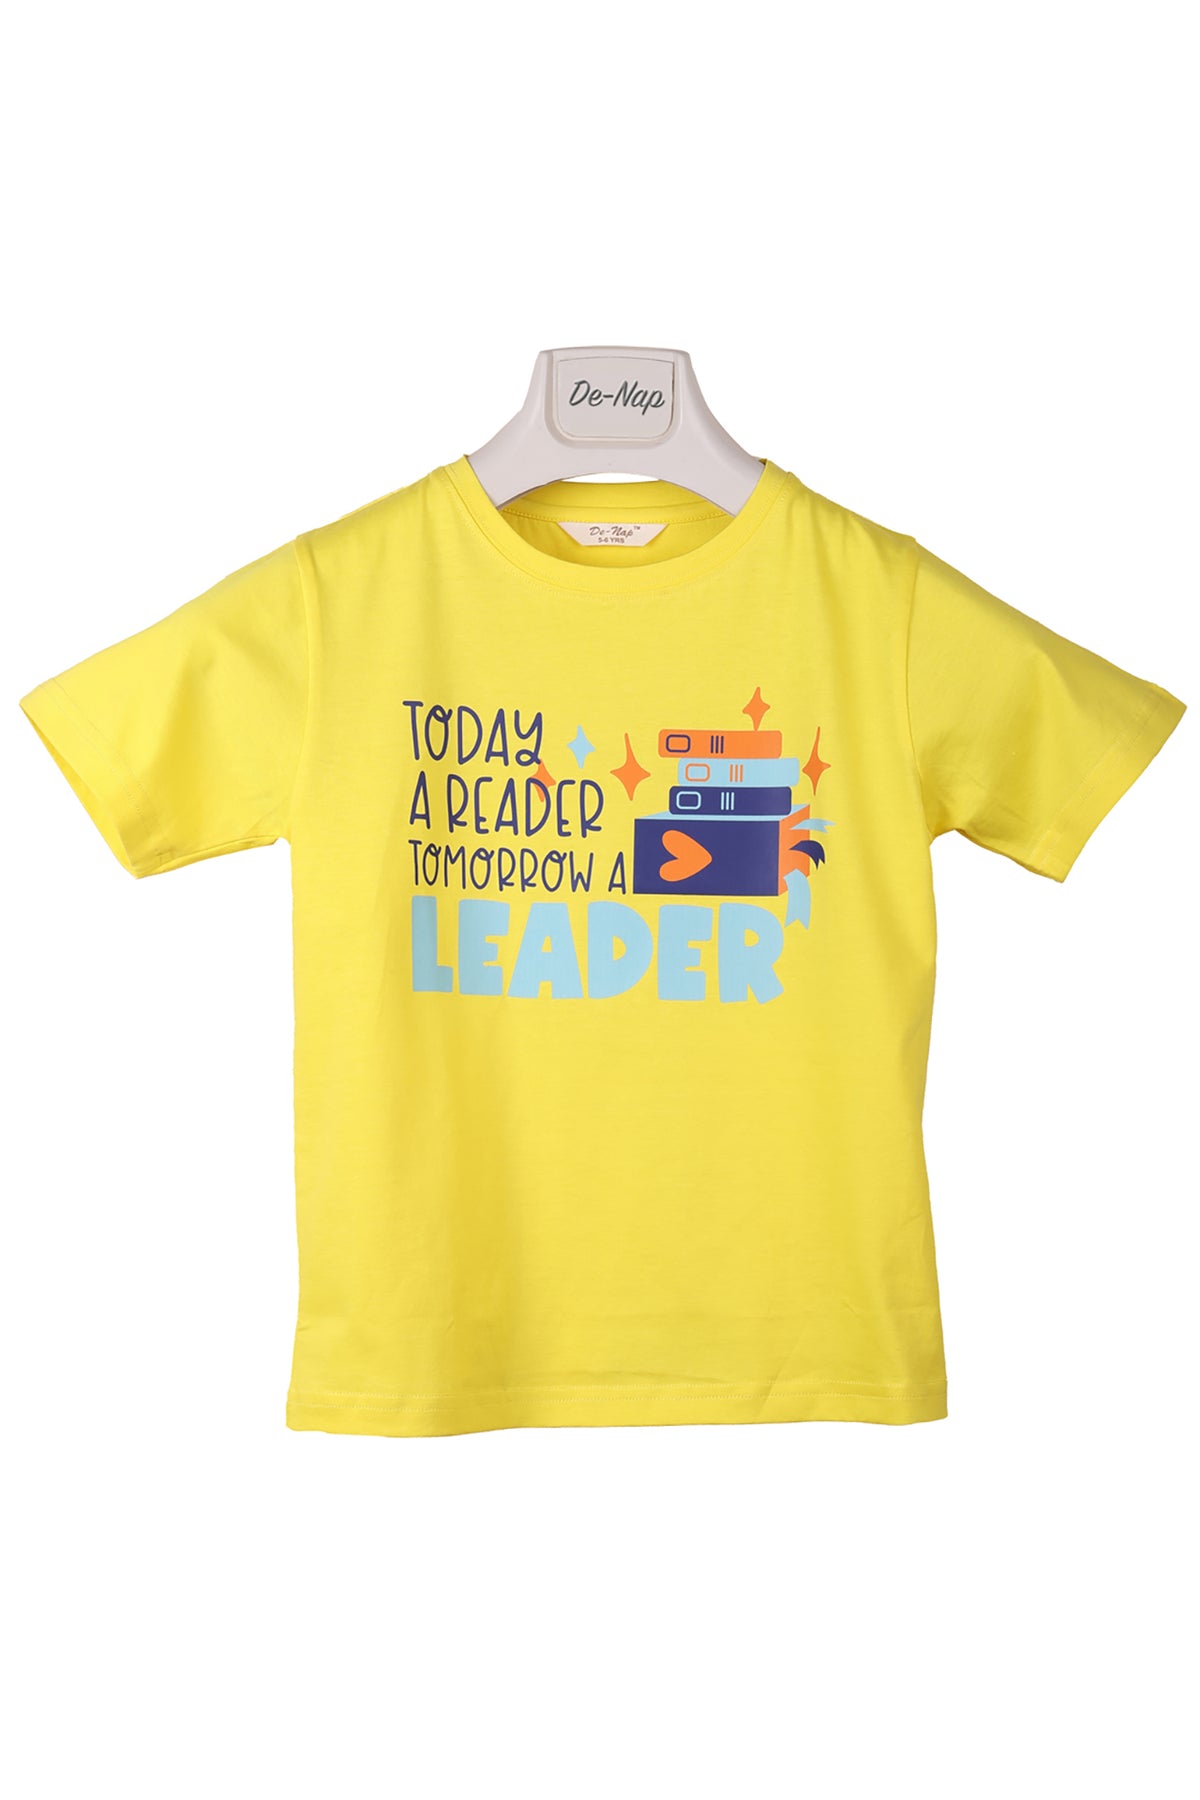 Today A Reader Tomorrow A Leader Yellow T-Shirt For Boys